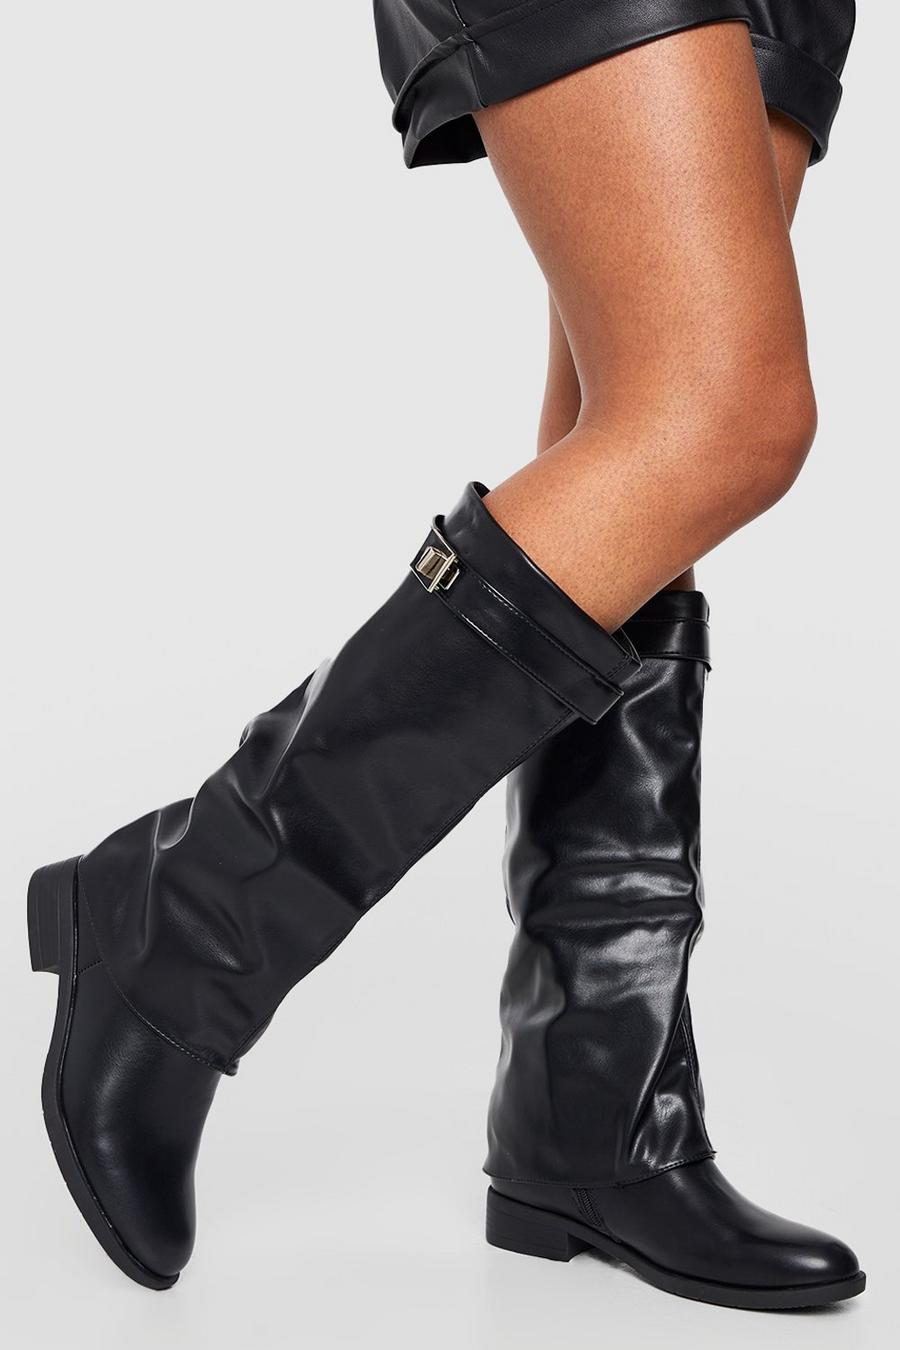 Fold Over Metal Detail Knee High Boots , Black nero